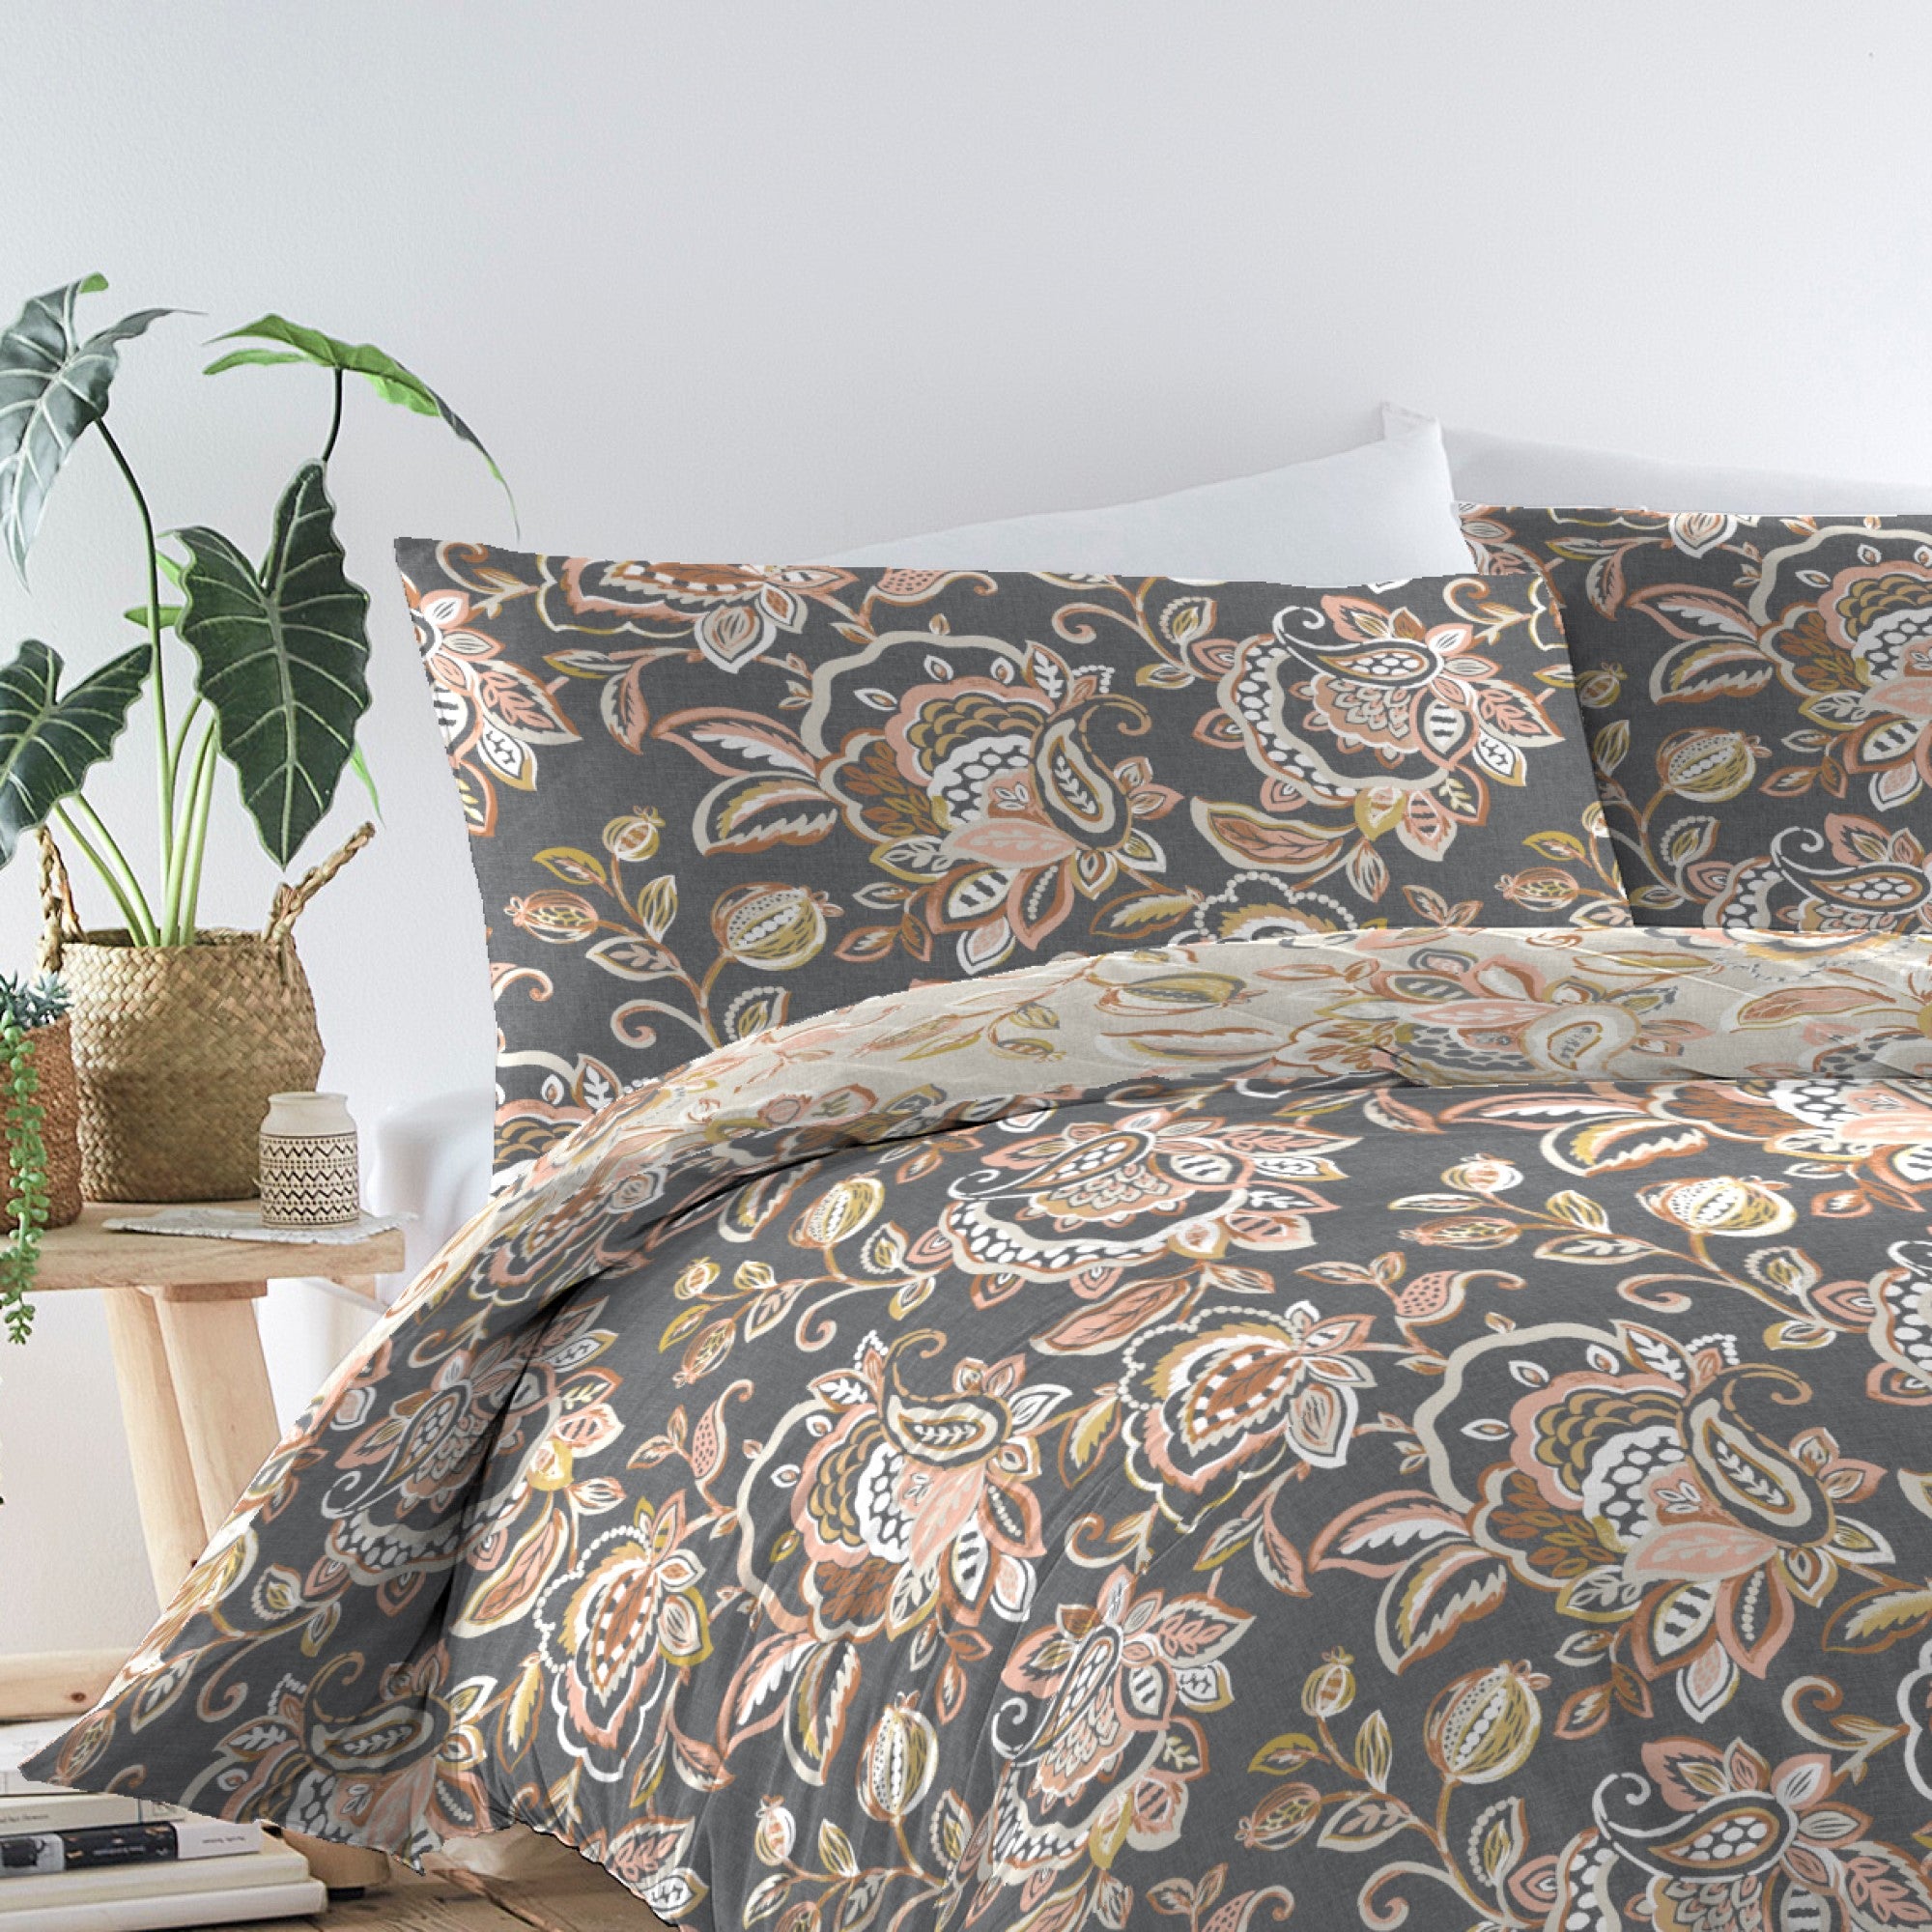 Duvet Cover Set Marisol by Appletree Promo in Charcoal